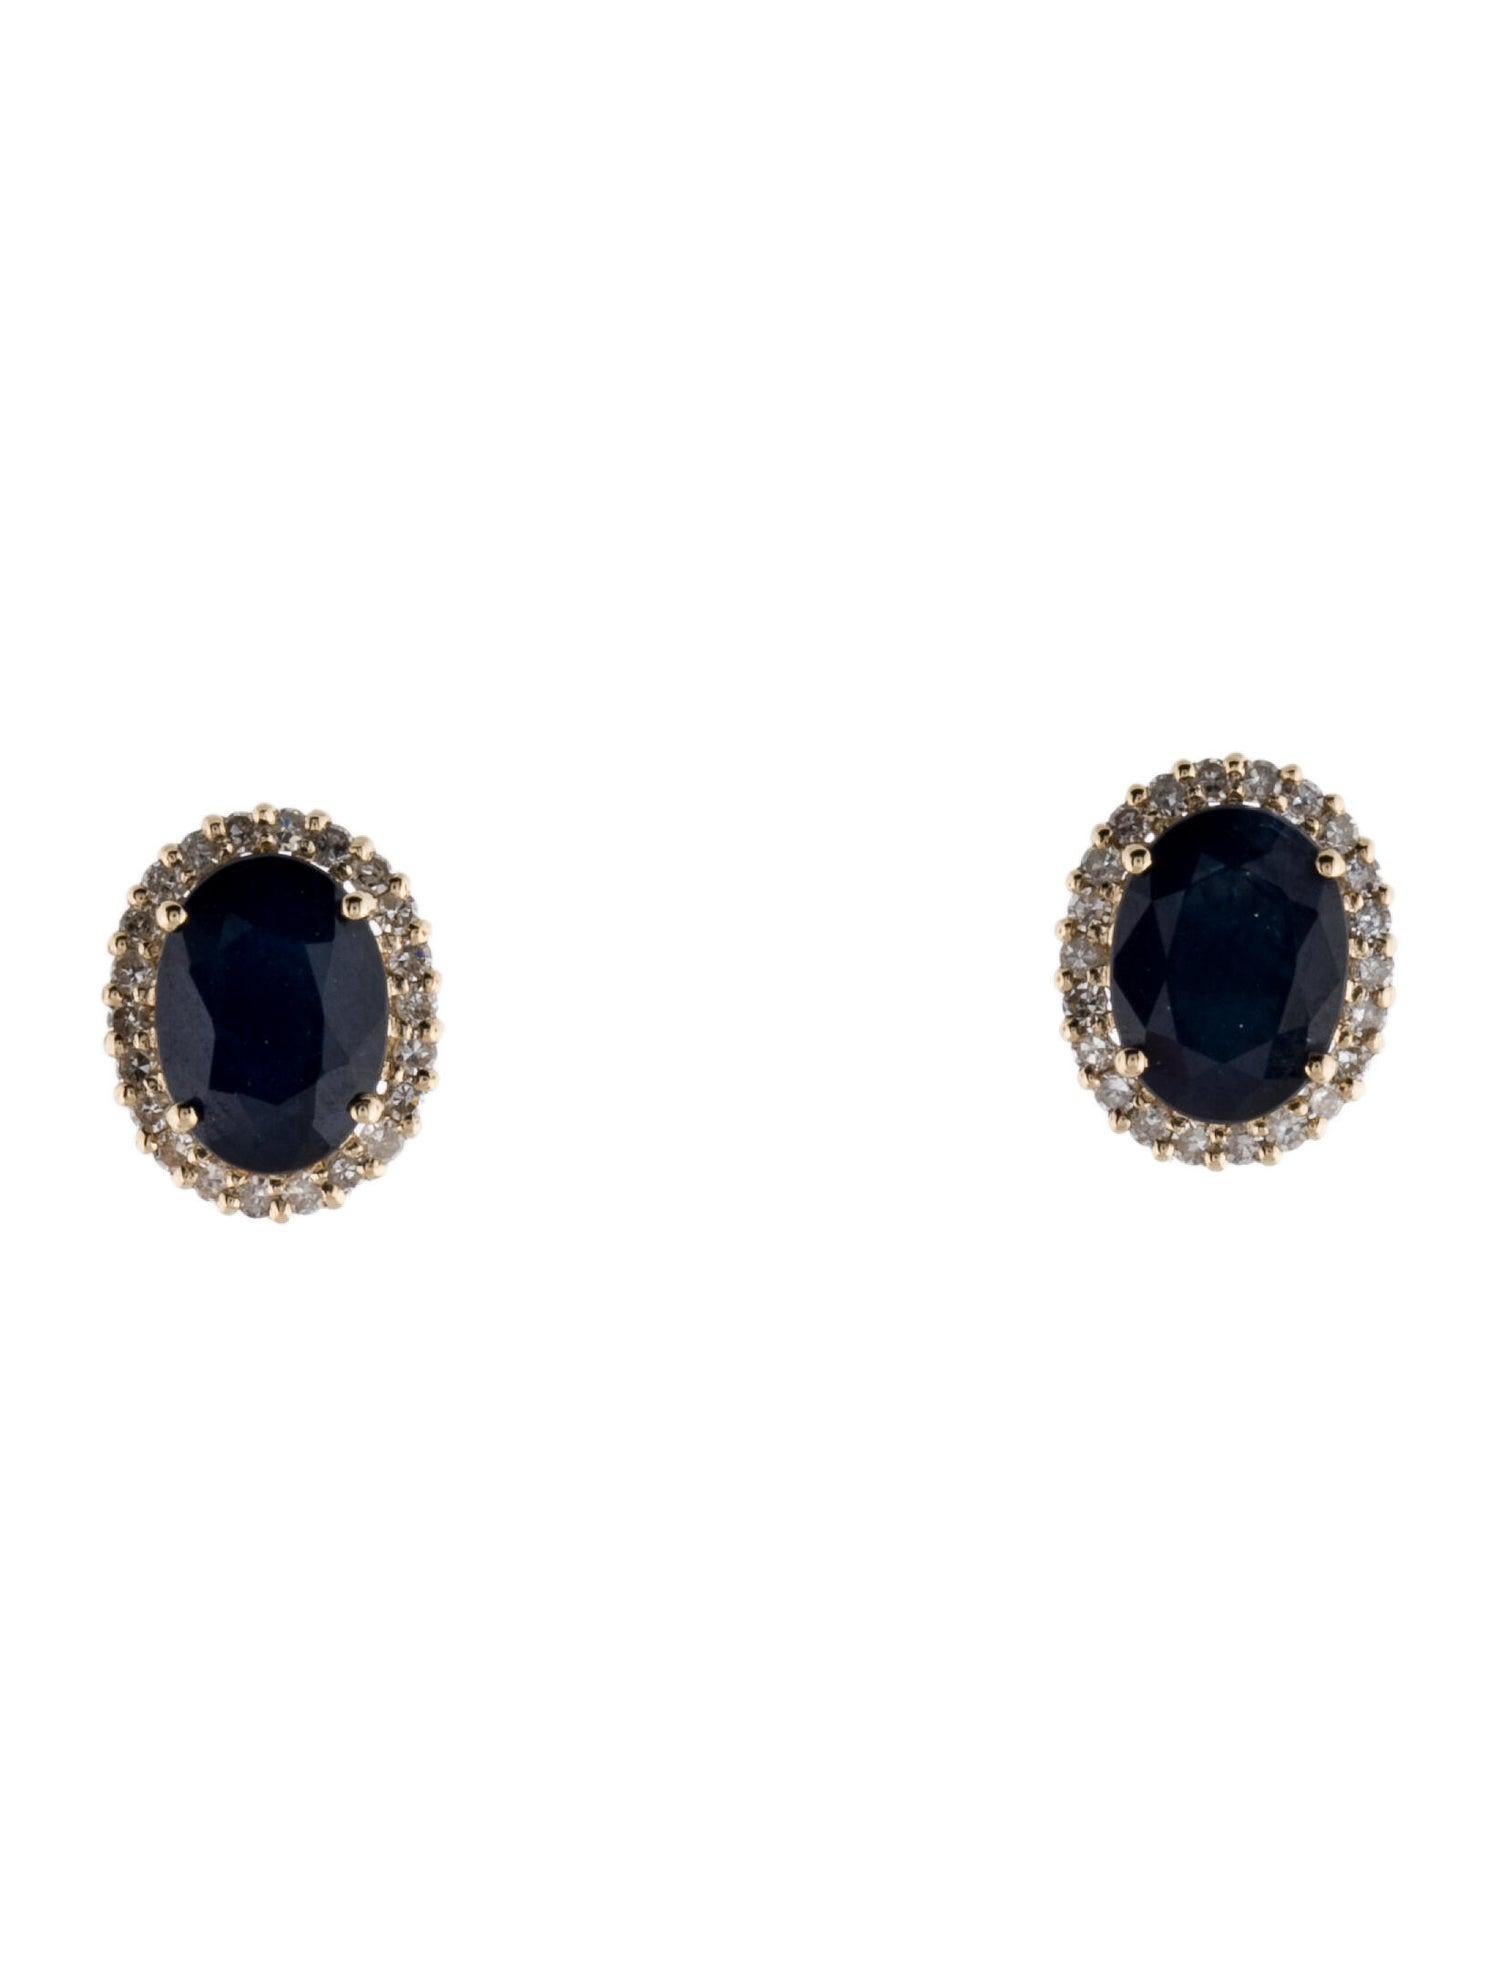 14K 3.00ctw Sapphire & Diamond Stud Earrings - Stunning & Timeless Elegance In New Condition For Sale In Holtsville, NY